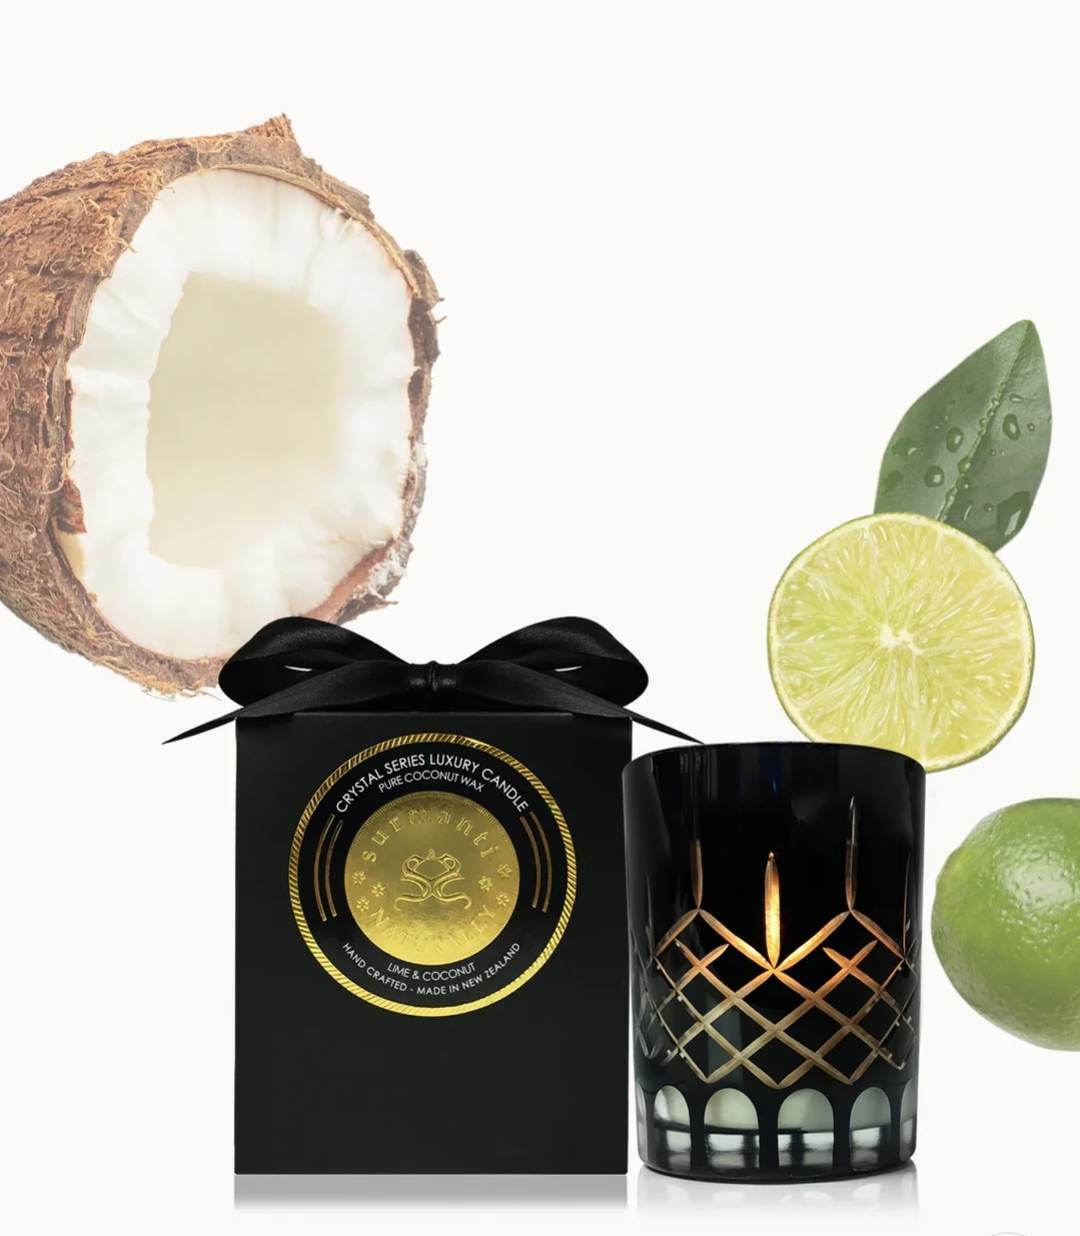 Surmanti Lime & Coconut Crystal Series Long Burning Pure Coconute Wax Candle small 150gm